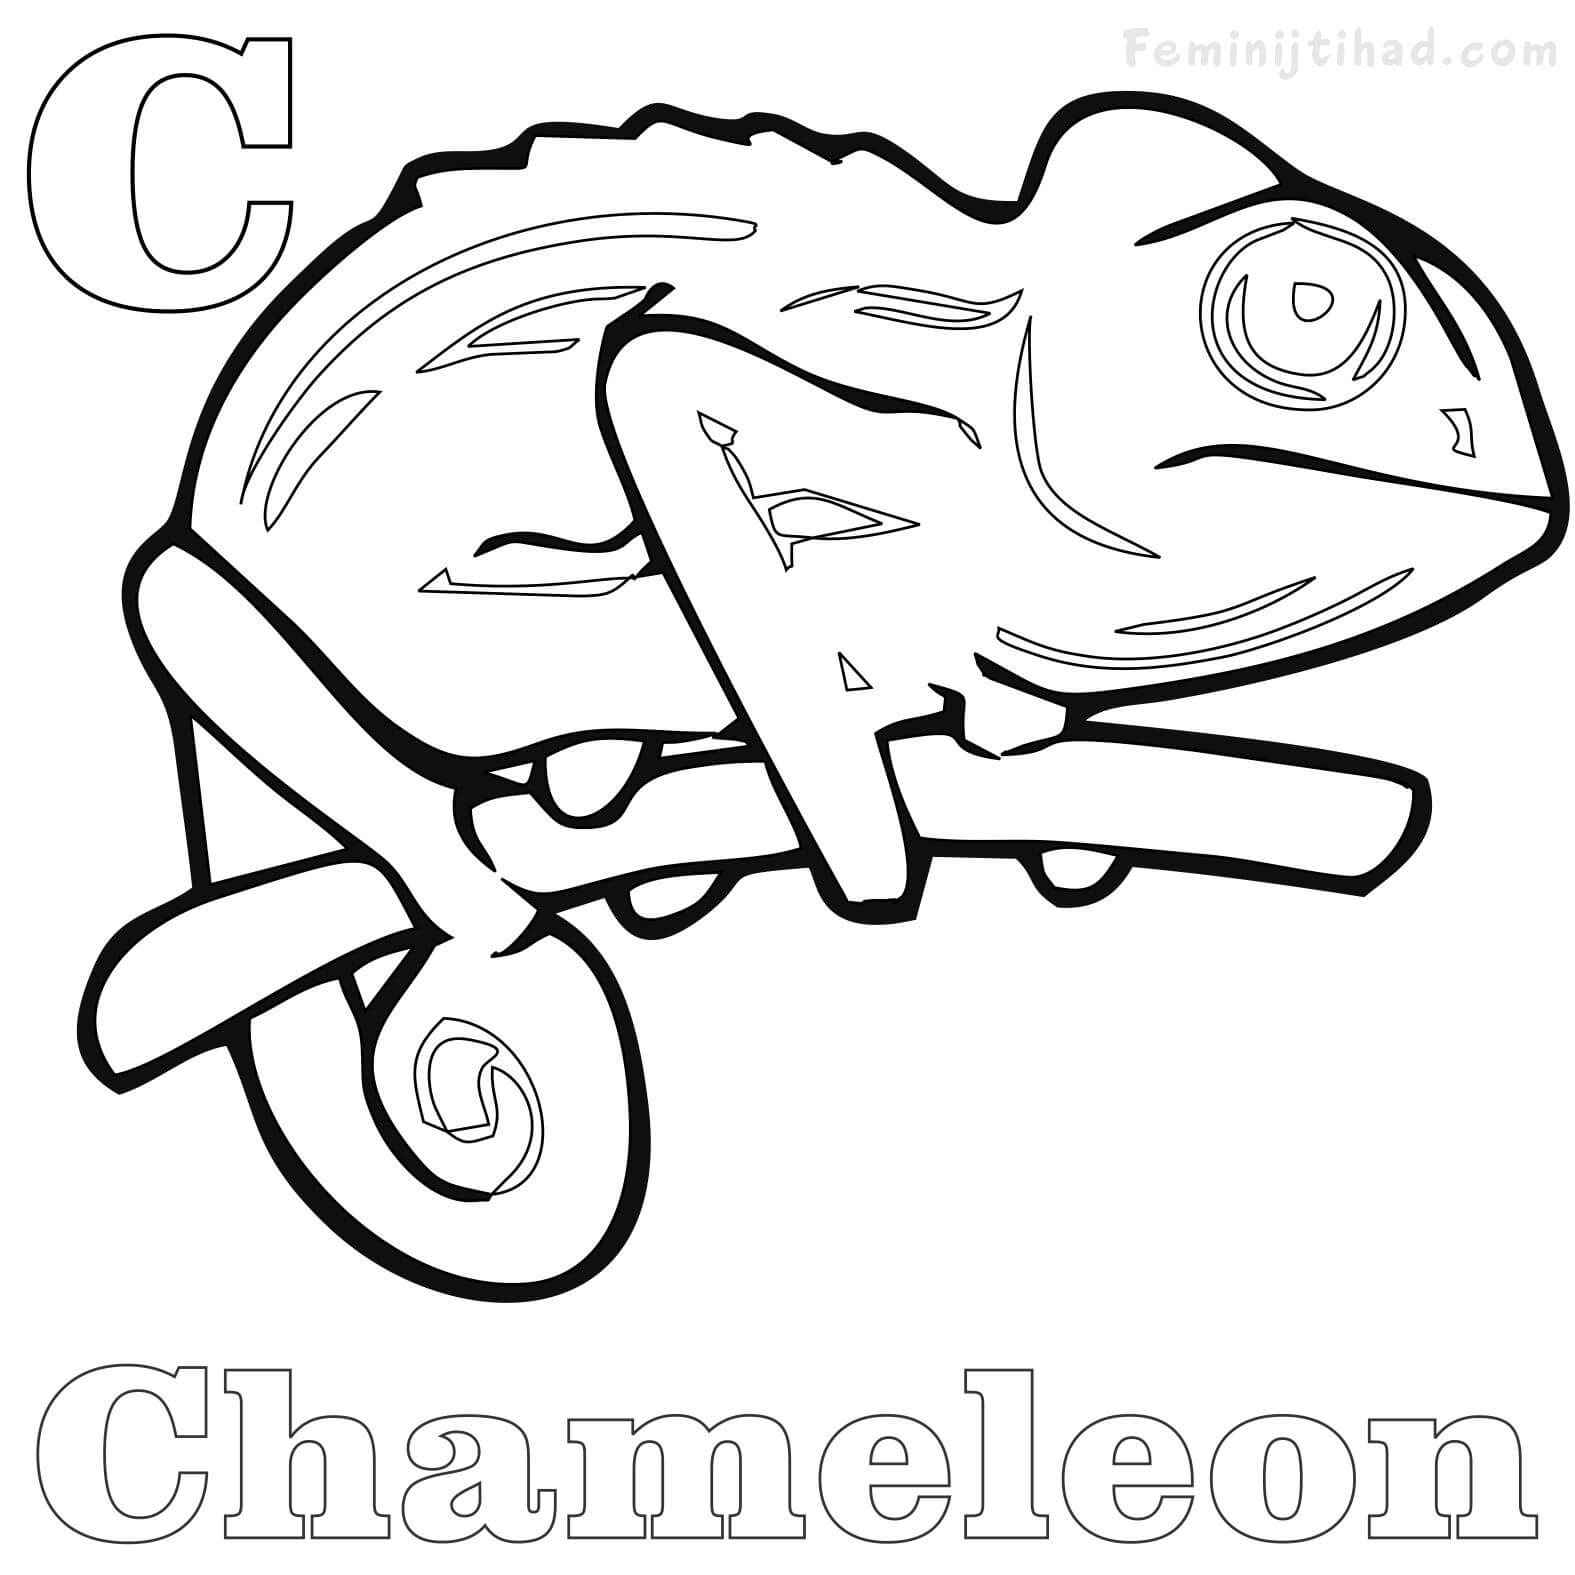 chameleon coloring book page